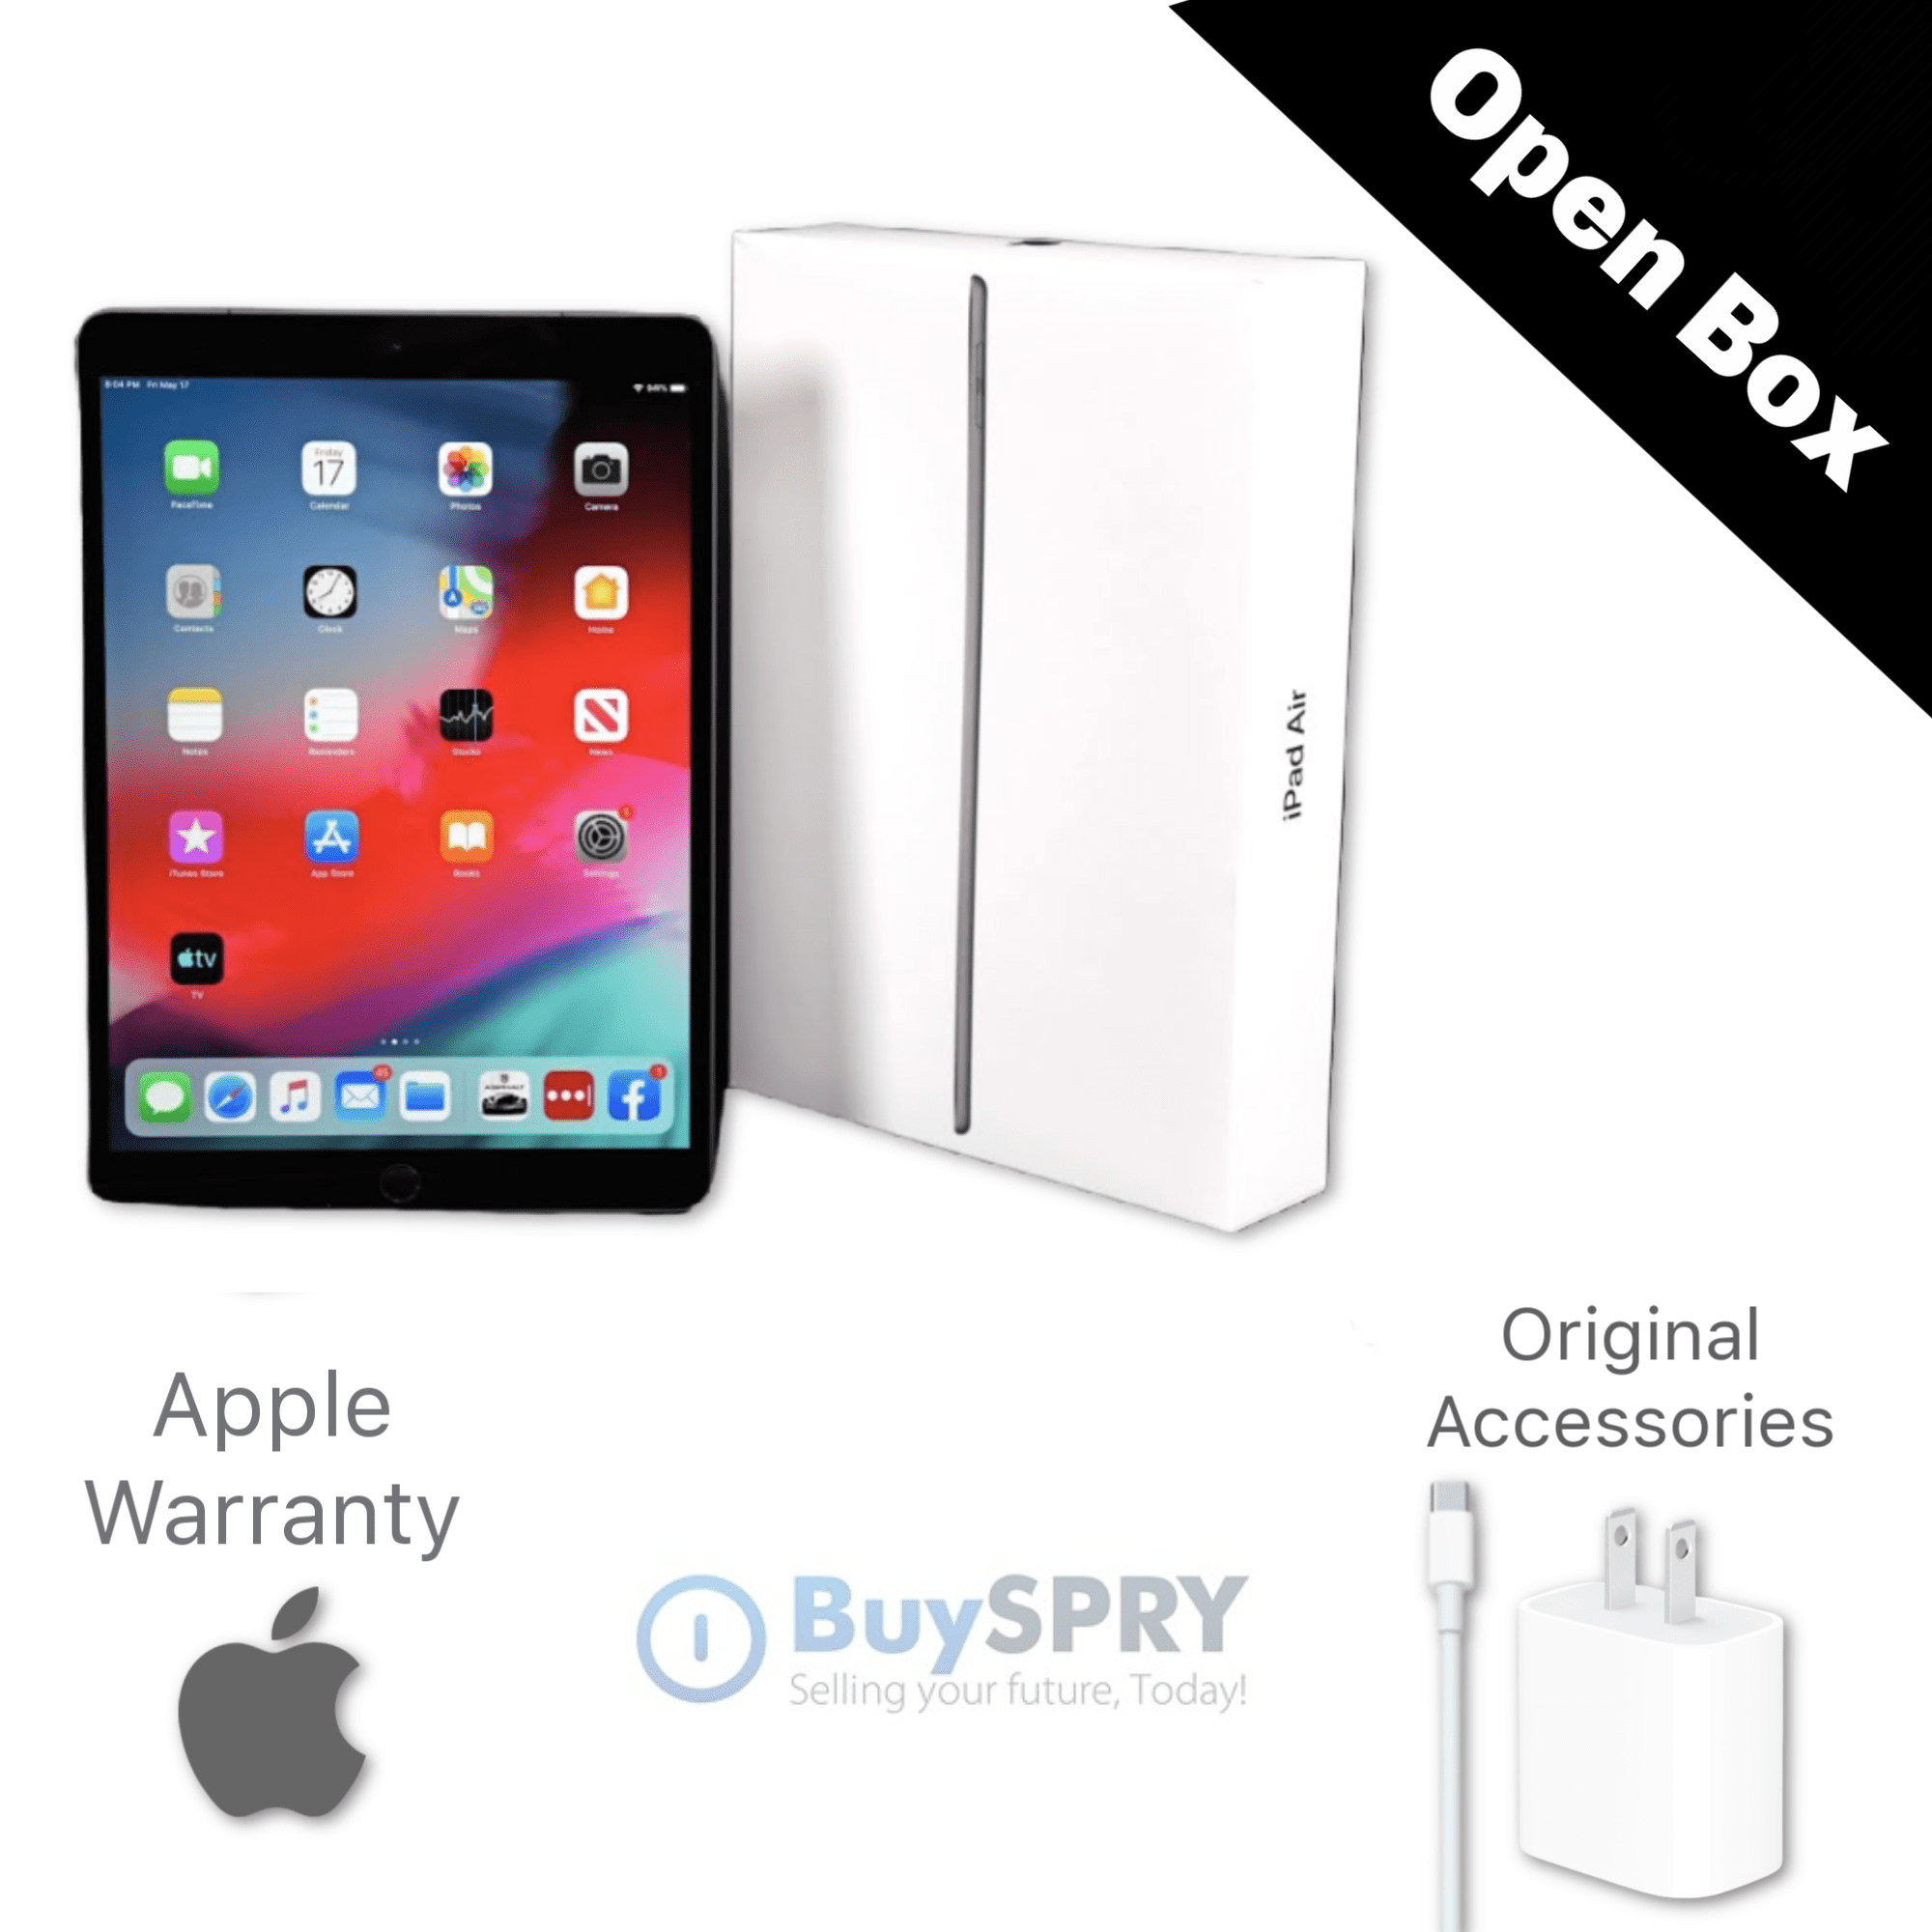 Apple iPad Air 10.5 (3rd Generation, 2019) WiFi Only 64GB Space Gray  MUUJ2LL/A - Open Box